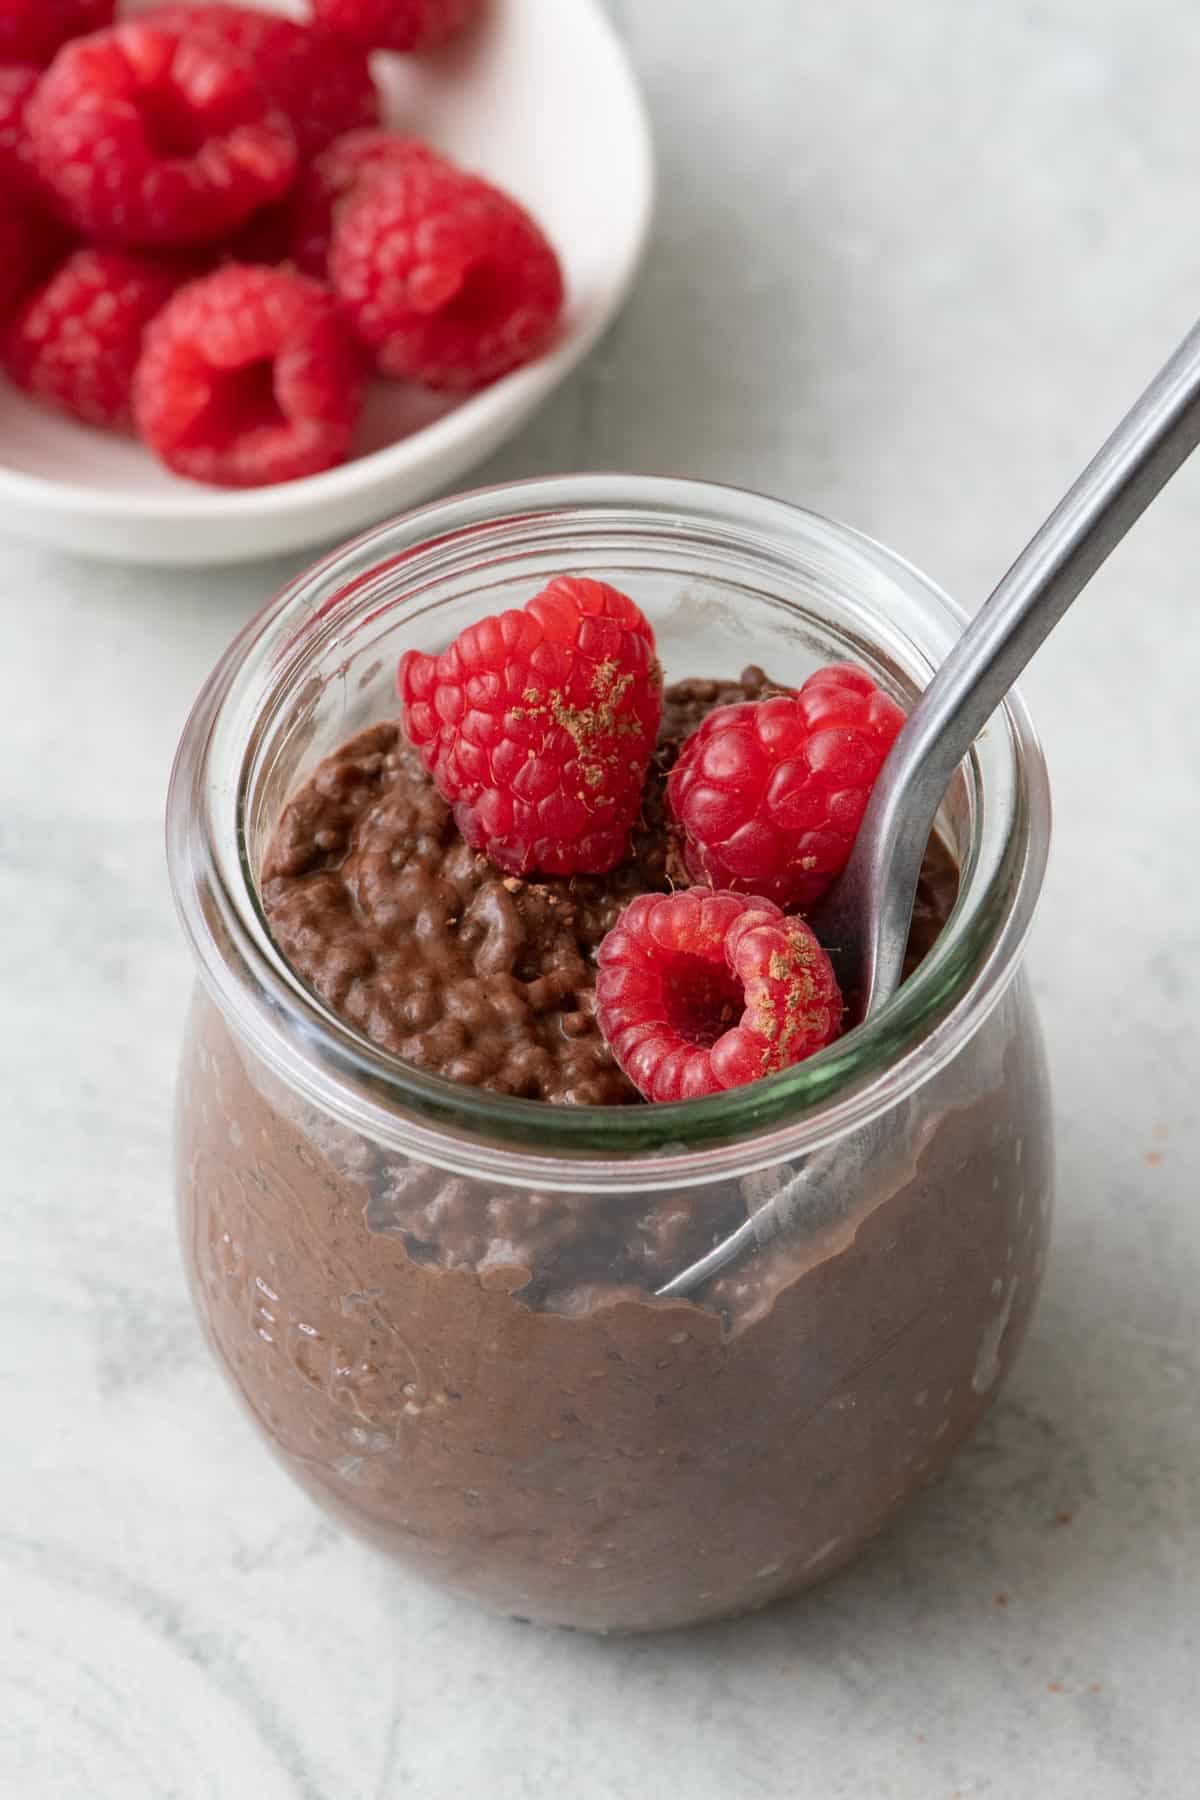 Large bowl of the chocolate chia pudding after it sets with small bow of chocolate chips on the side